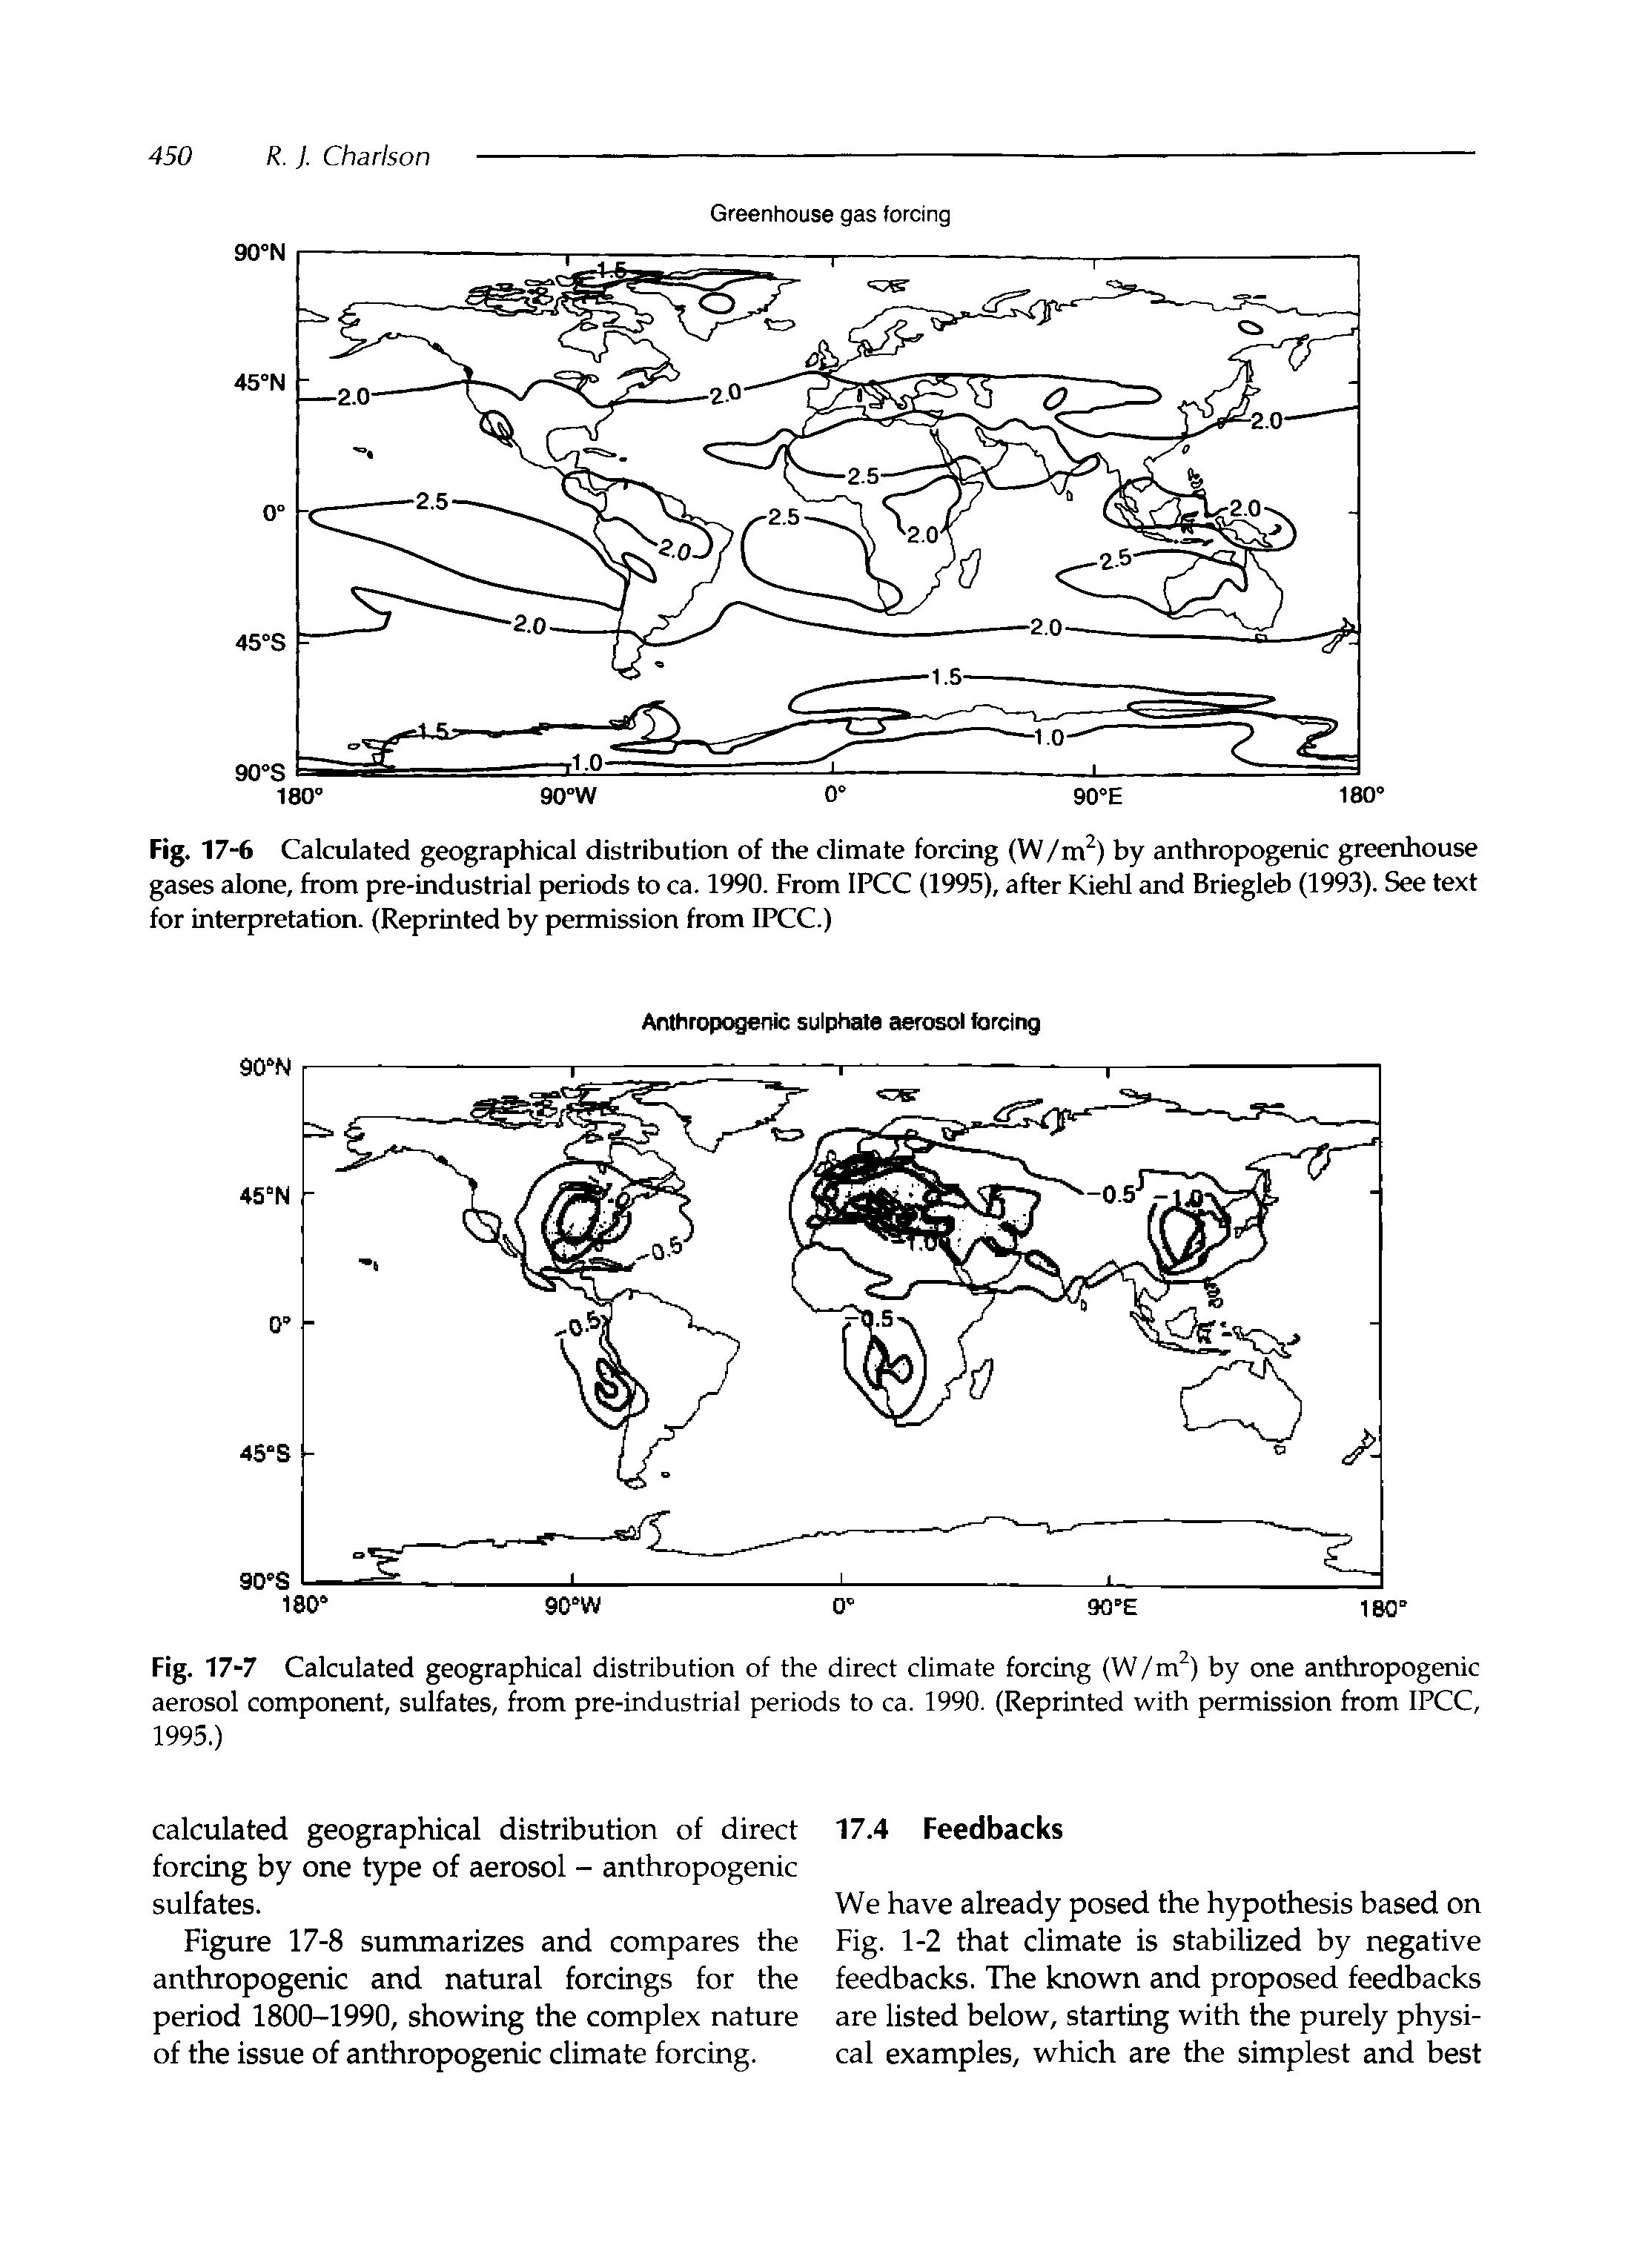 Fig. 17-6 Calculated geographical distribution of the climate forcing (W/m ) by anthropogenic greenhouse gases alone, from pre-industrial periods to ca. 1990. From IPCC (1995), after Kiehl and Briegleb (1993). See text for interpretation. (Reprinted by permission from IPCC.)...